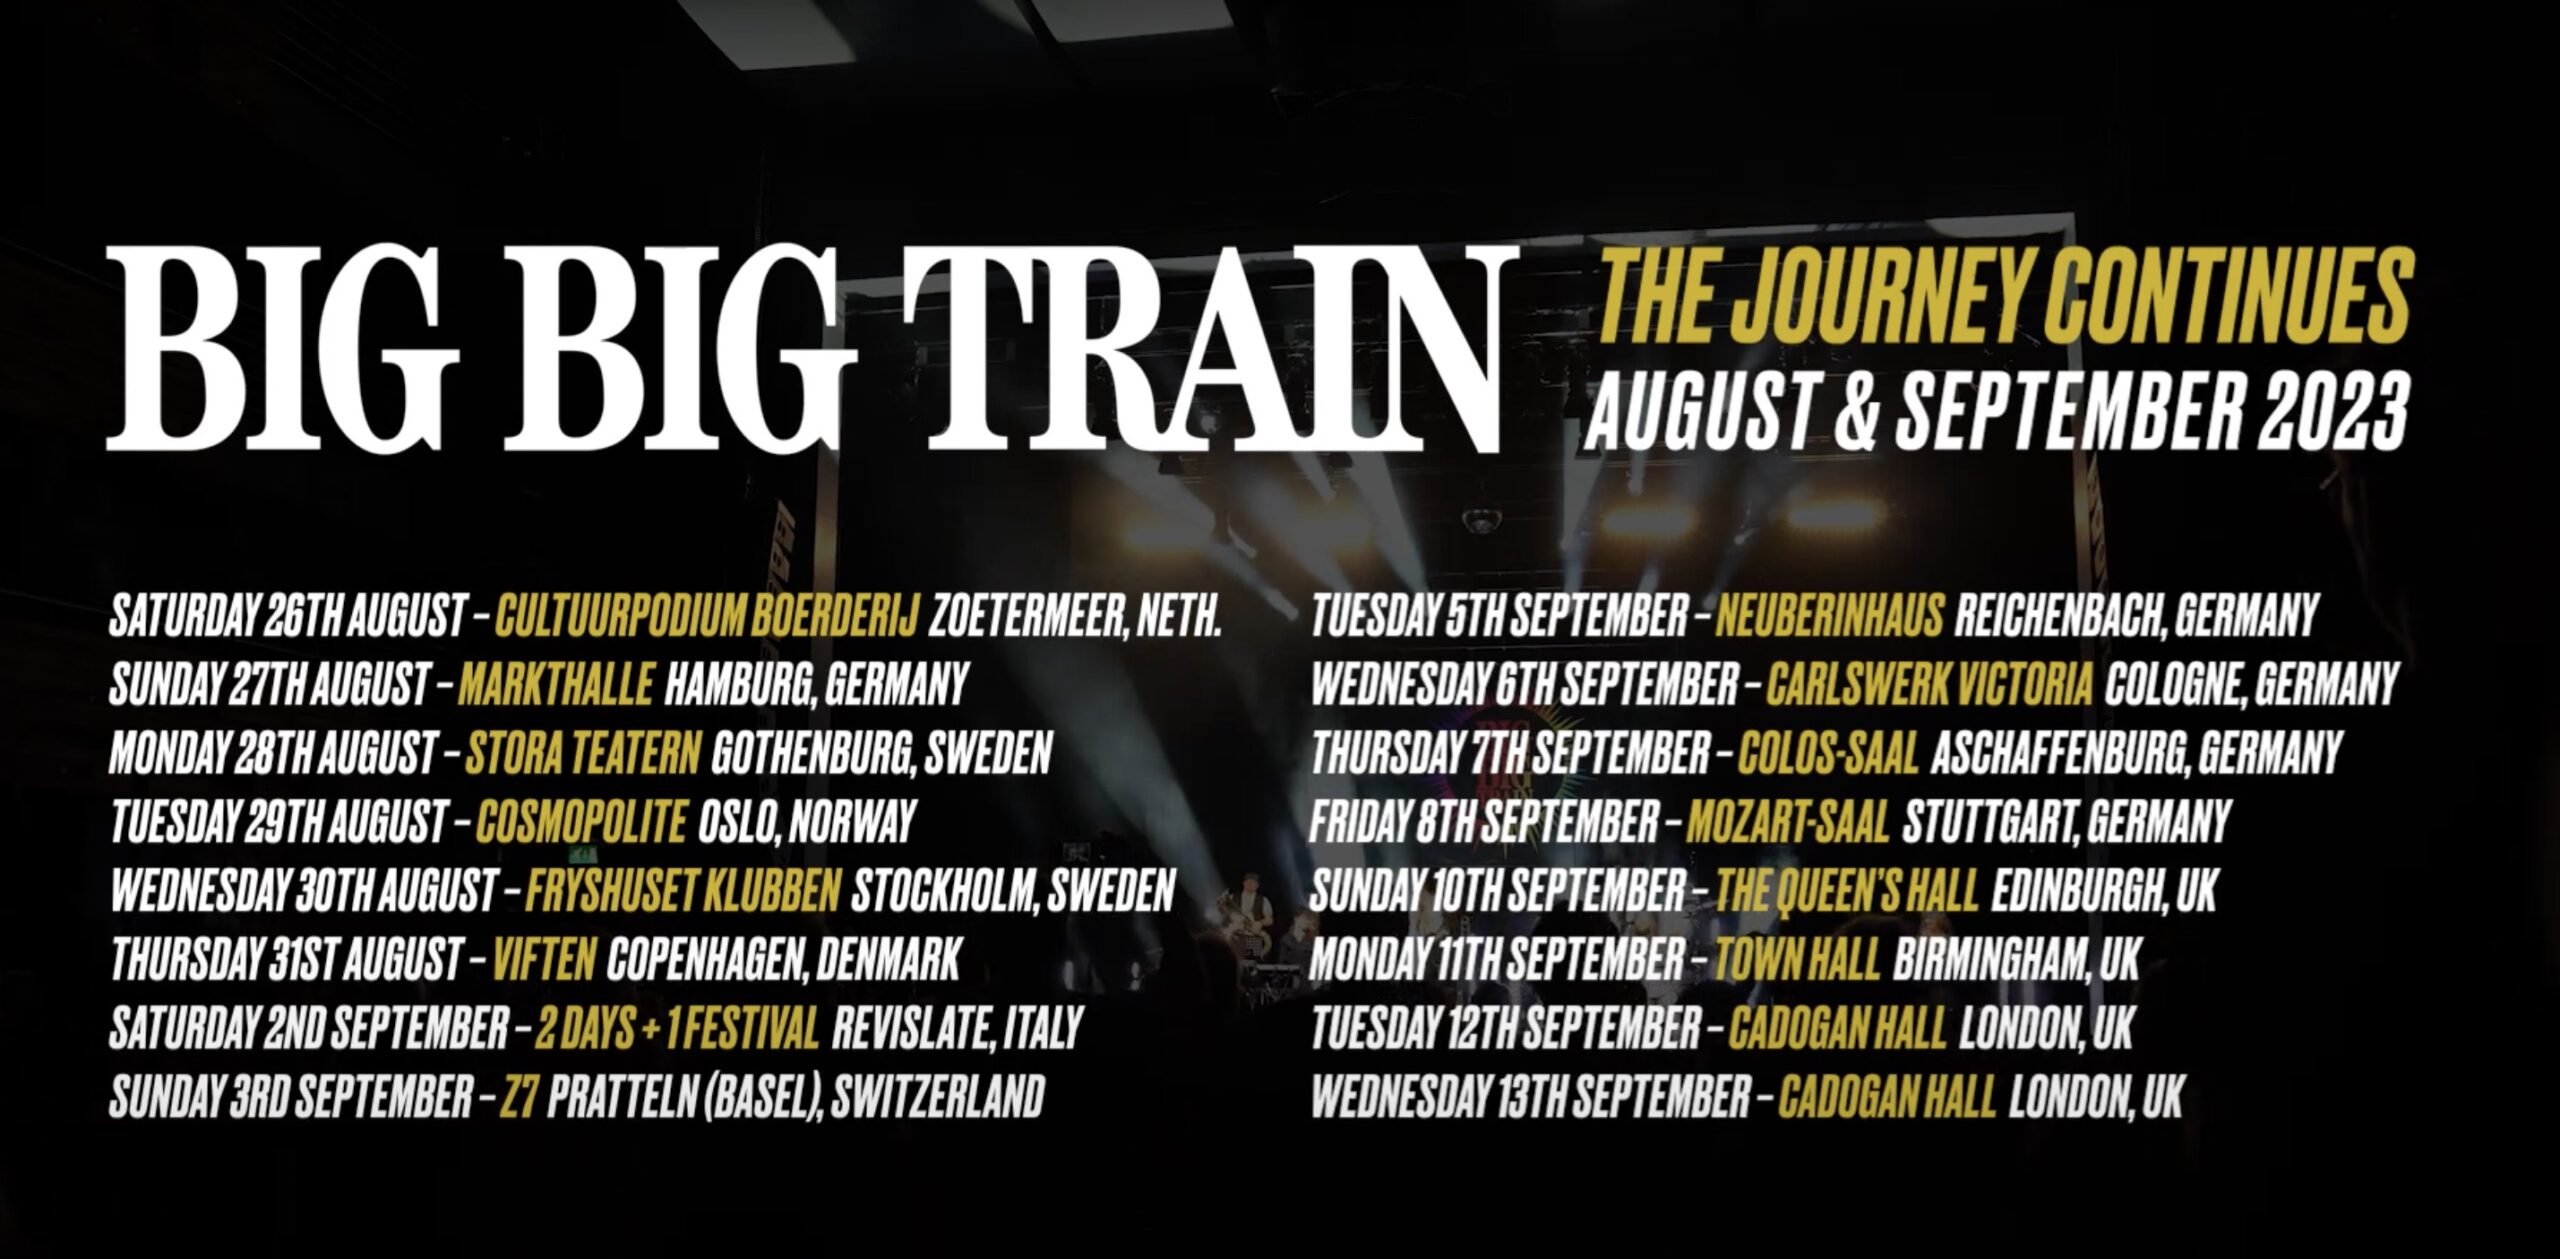 Big Big Train announce more tour dates across Europe and UK for August